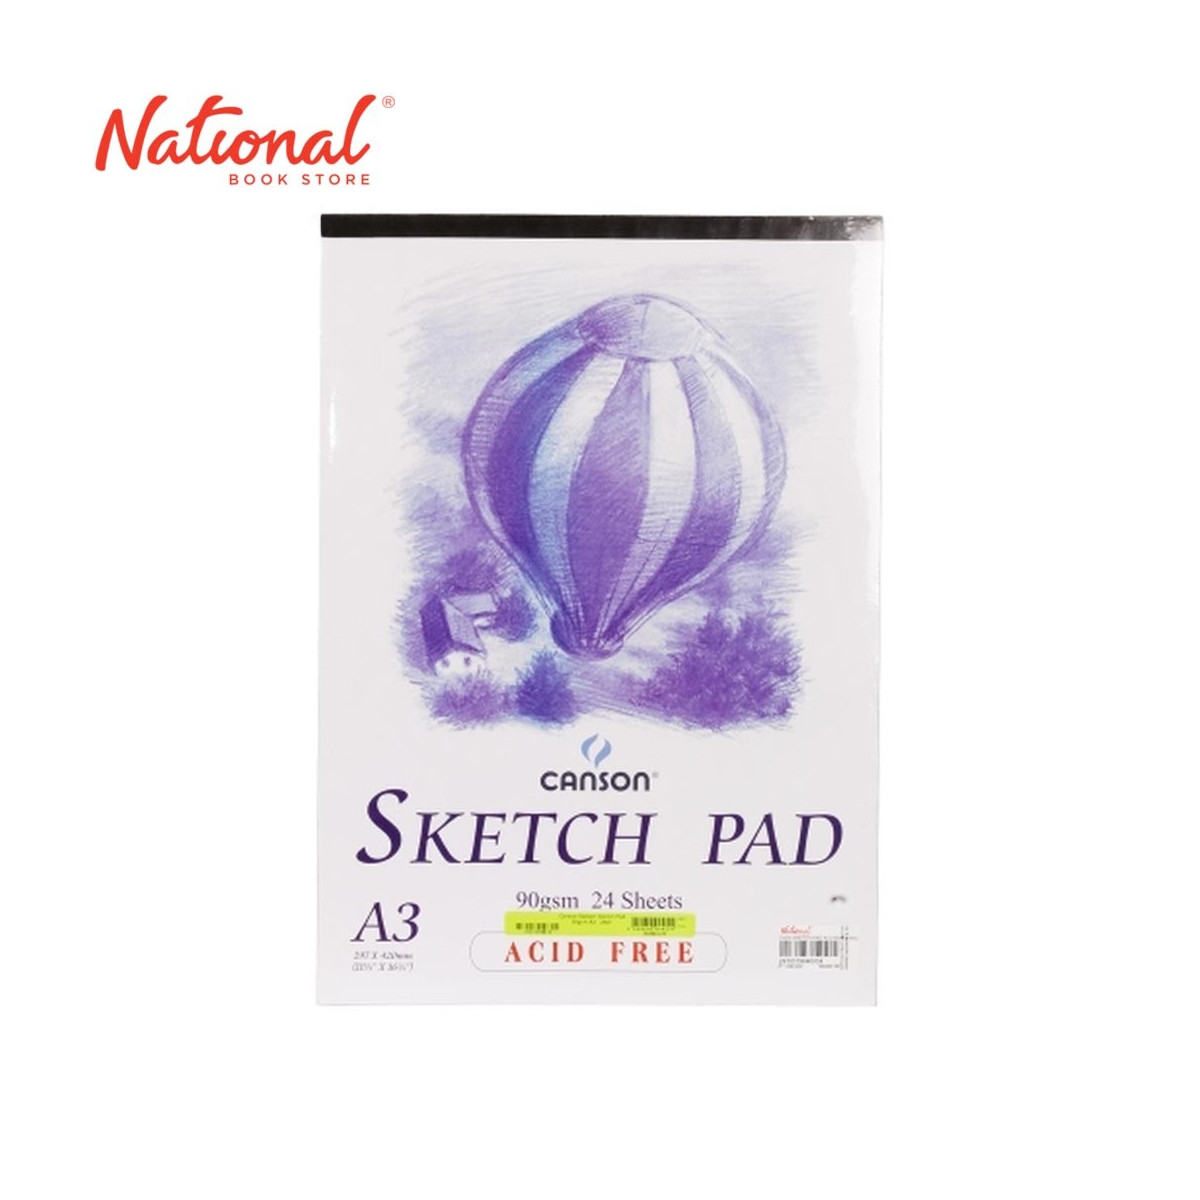 CANSON BALLOON SKETCH PAD A3 24 SHEETS